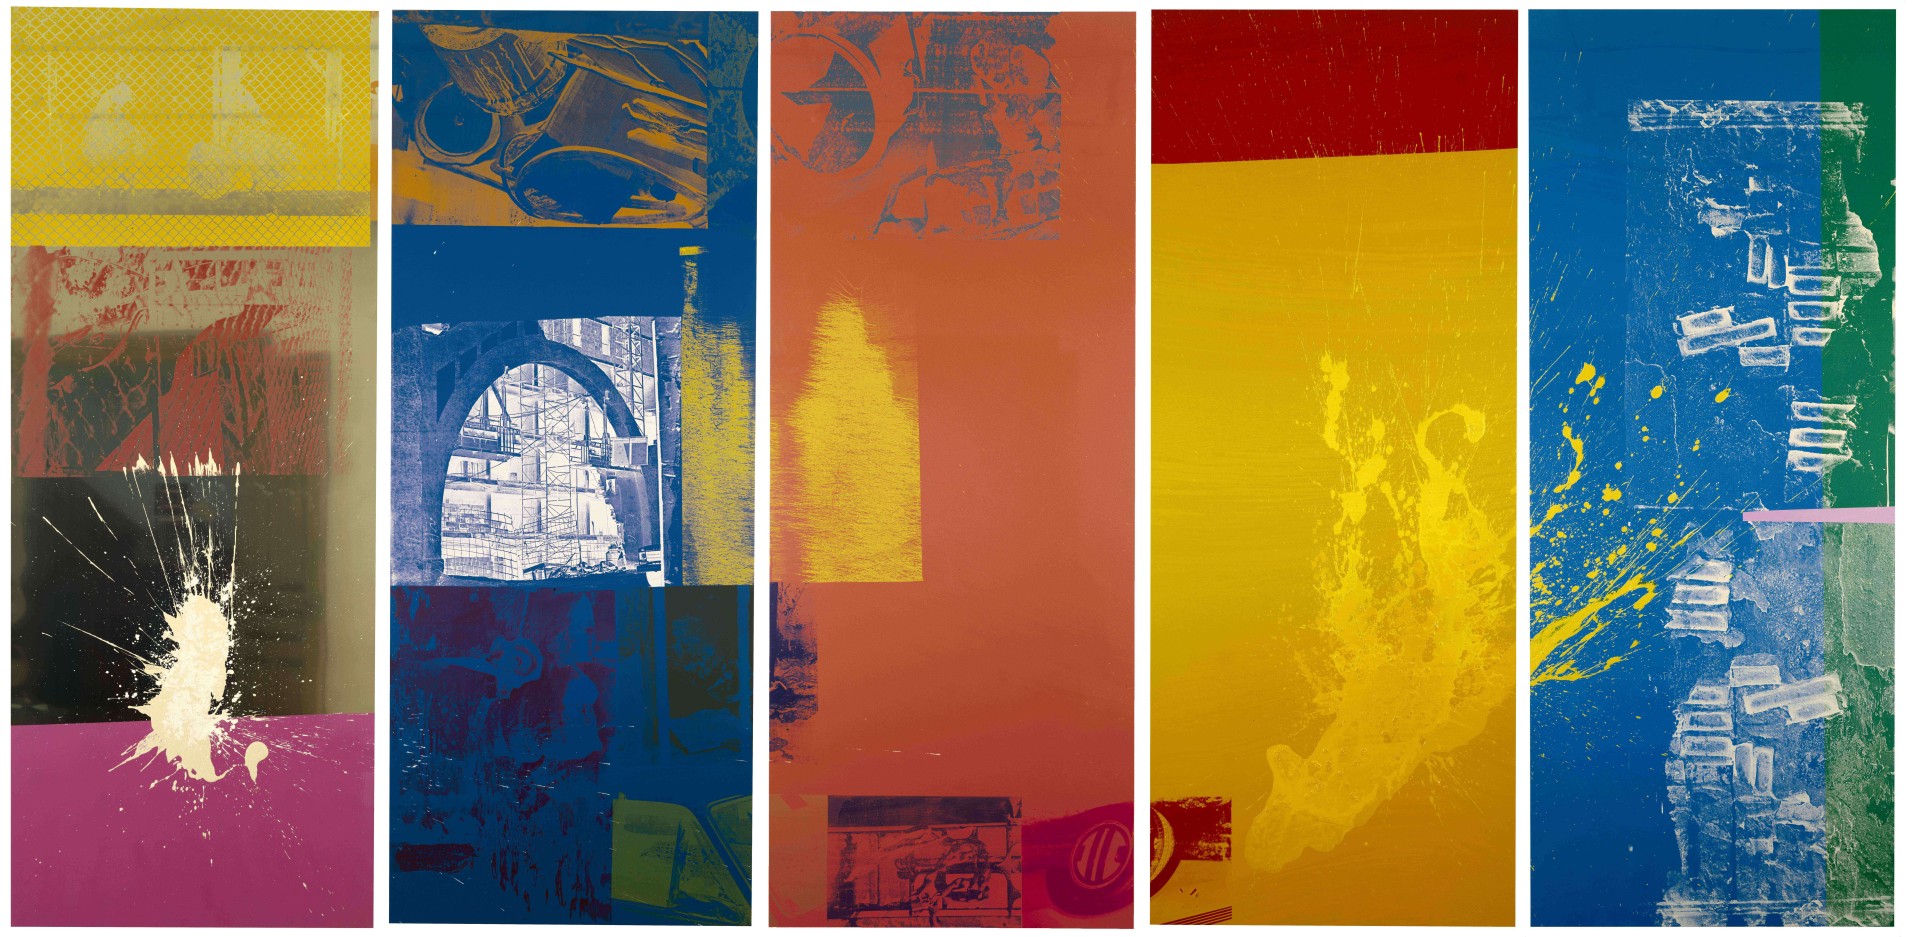 From Beijing via Hong Kong to London, it's the year of Robert Rauschenberg  | South China Morning Post